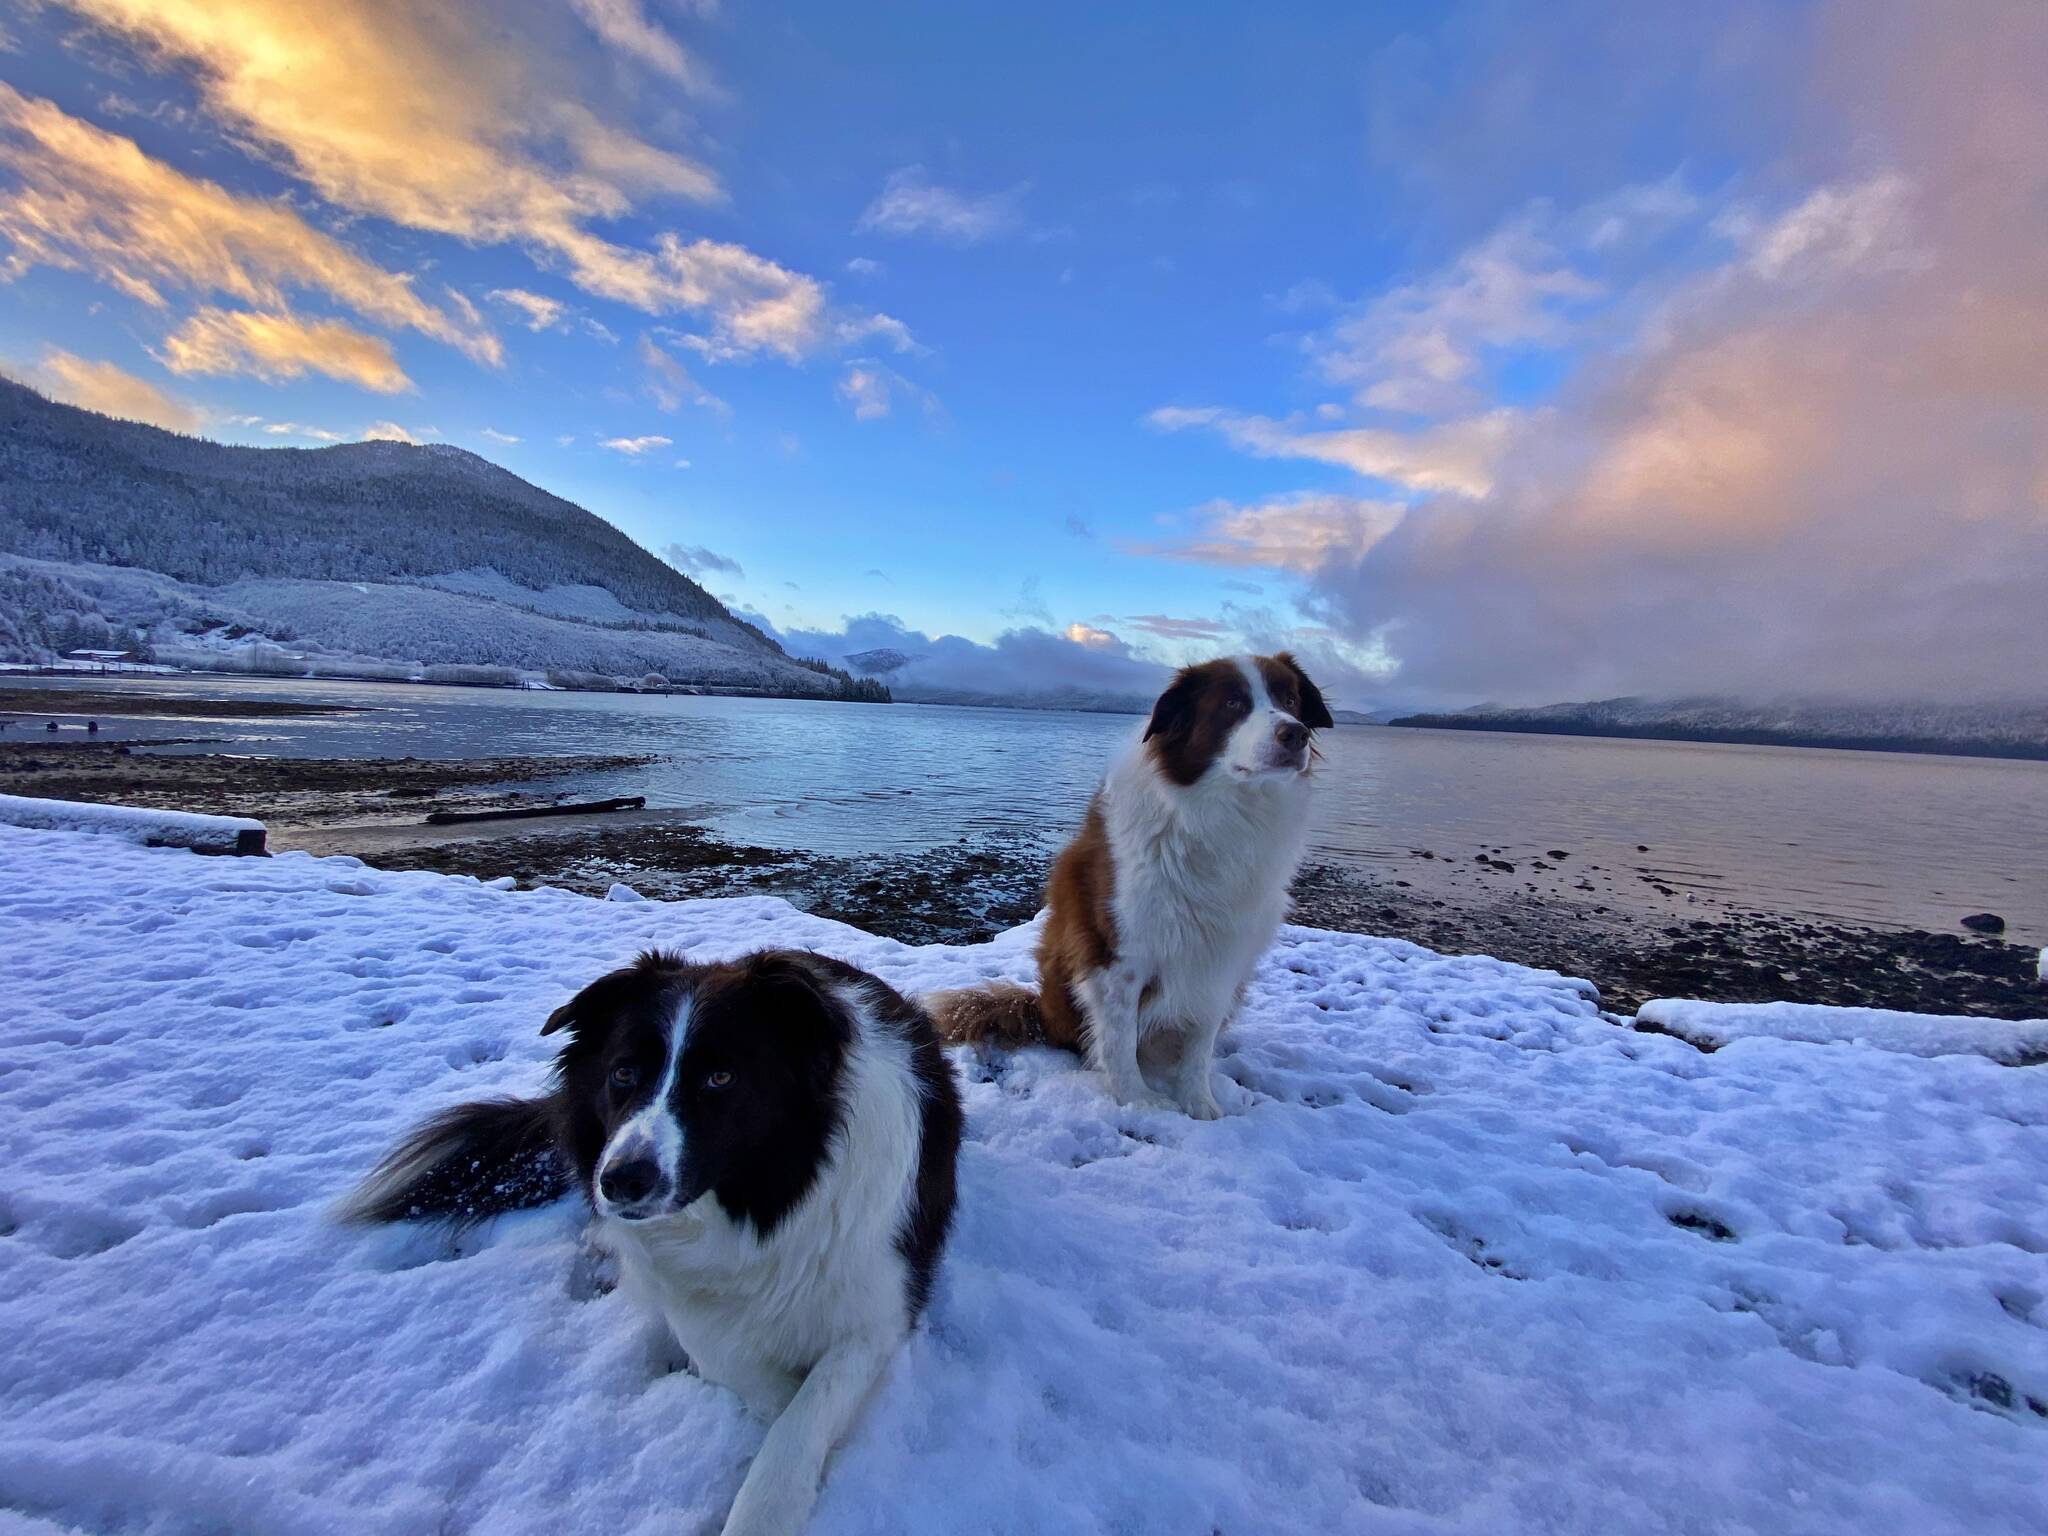 Kéet and Oscar wait patiently to play on the beach in winter in Wrangell. (Vivian Faith Prescott / For the Capital City Weekly)